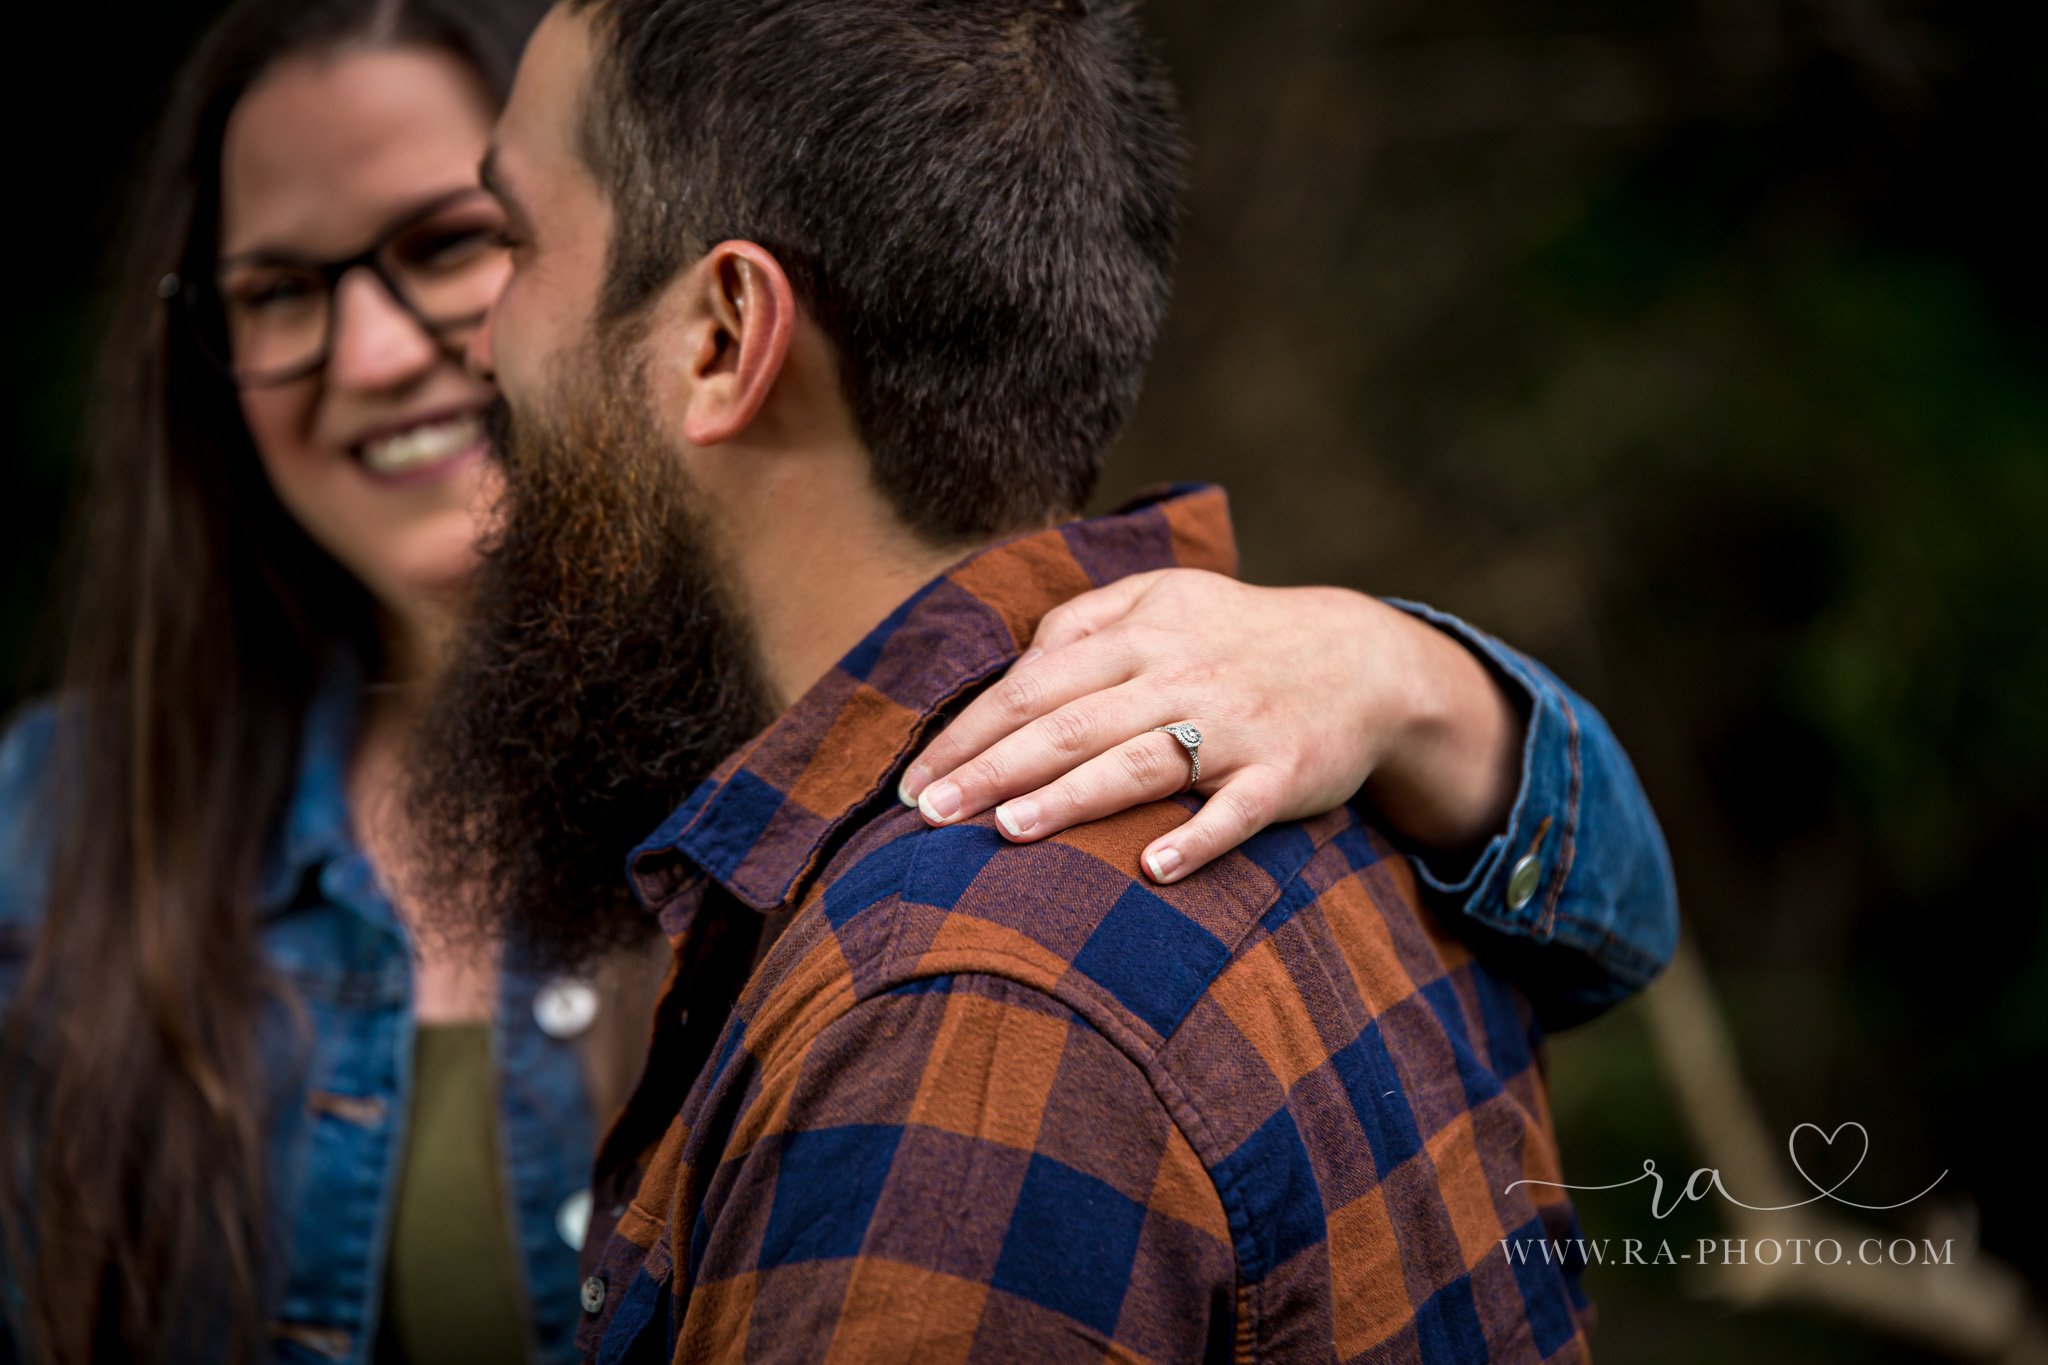 005-MGS-FALLS-CREEK-PA-ENGAGEMENT-PICTURES.jpg